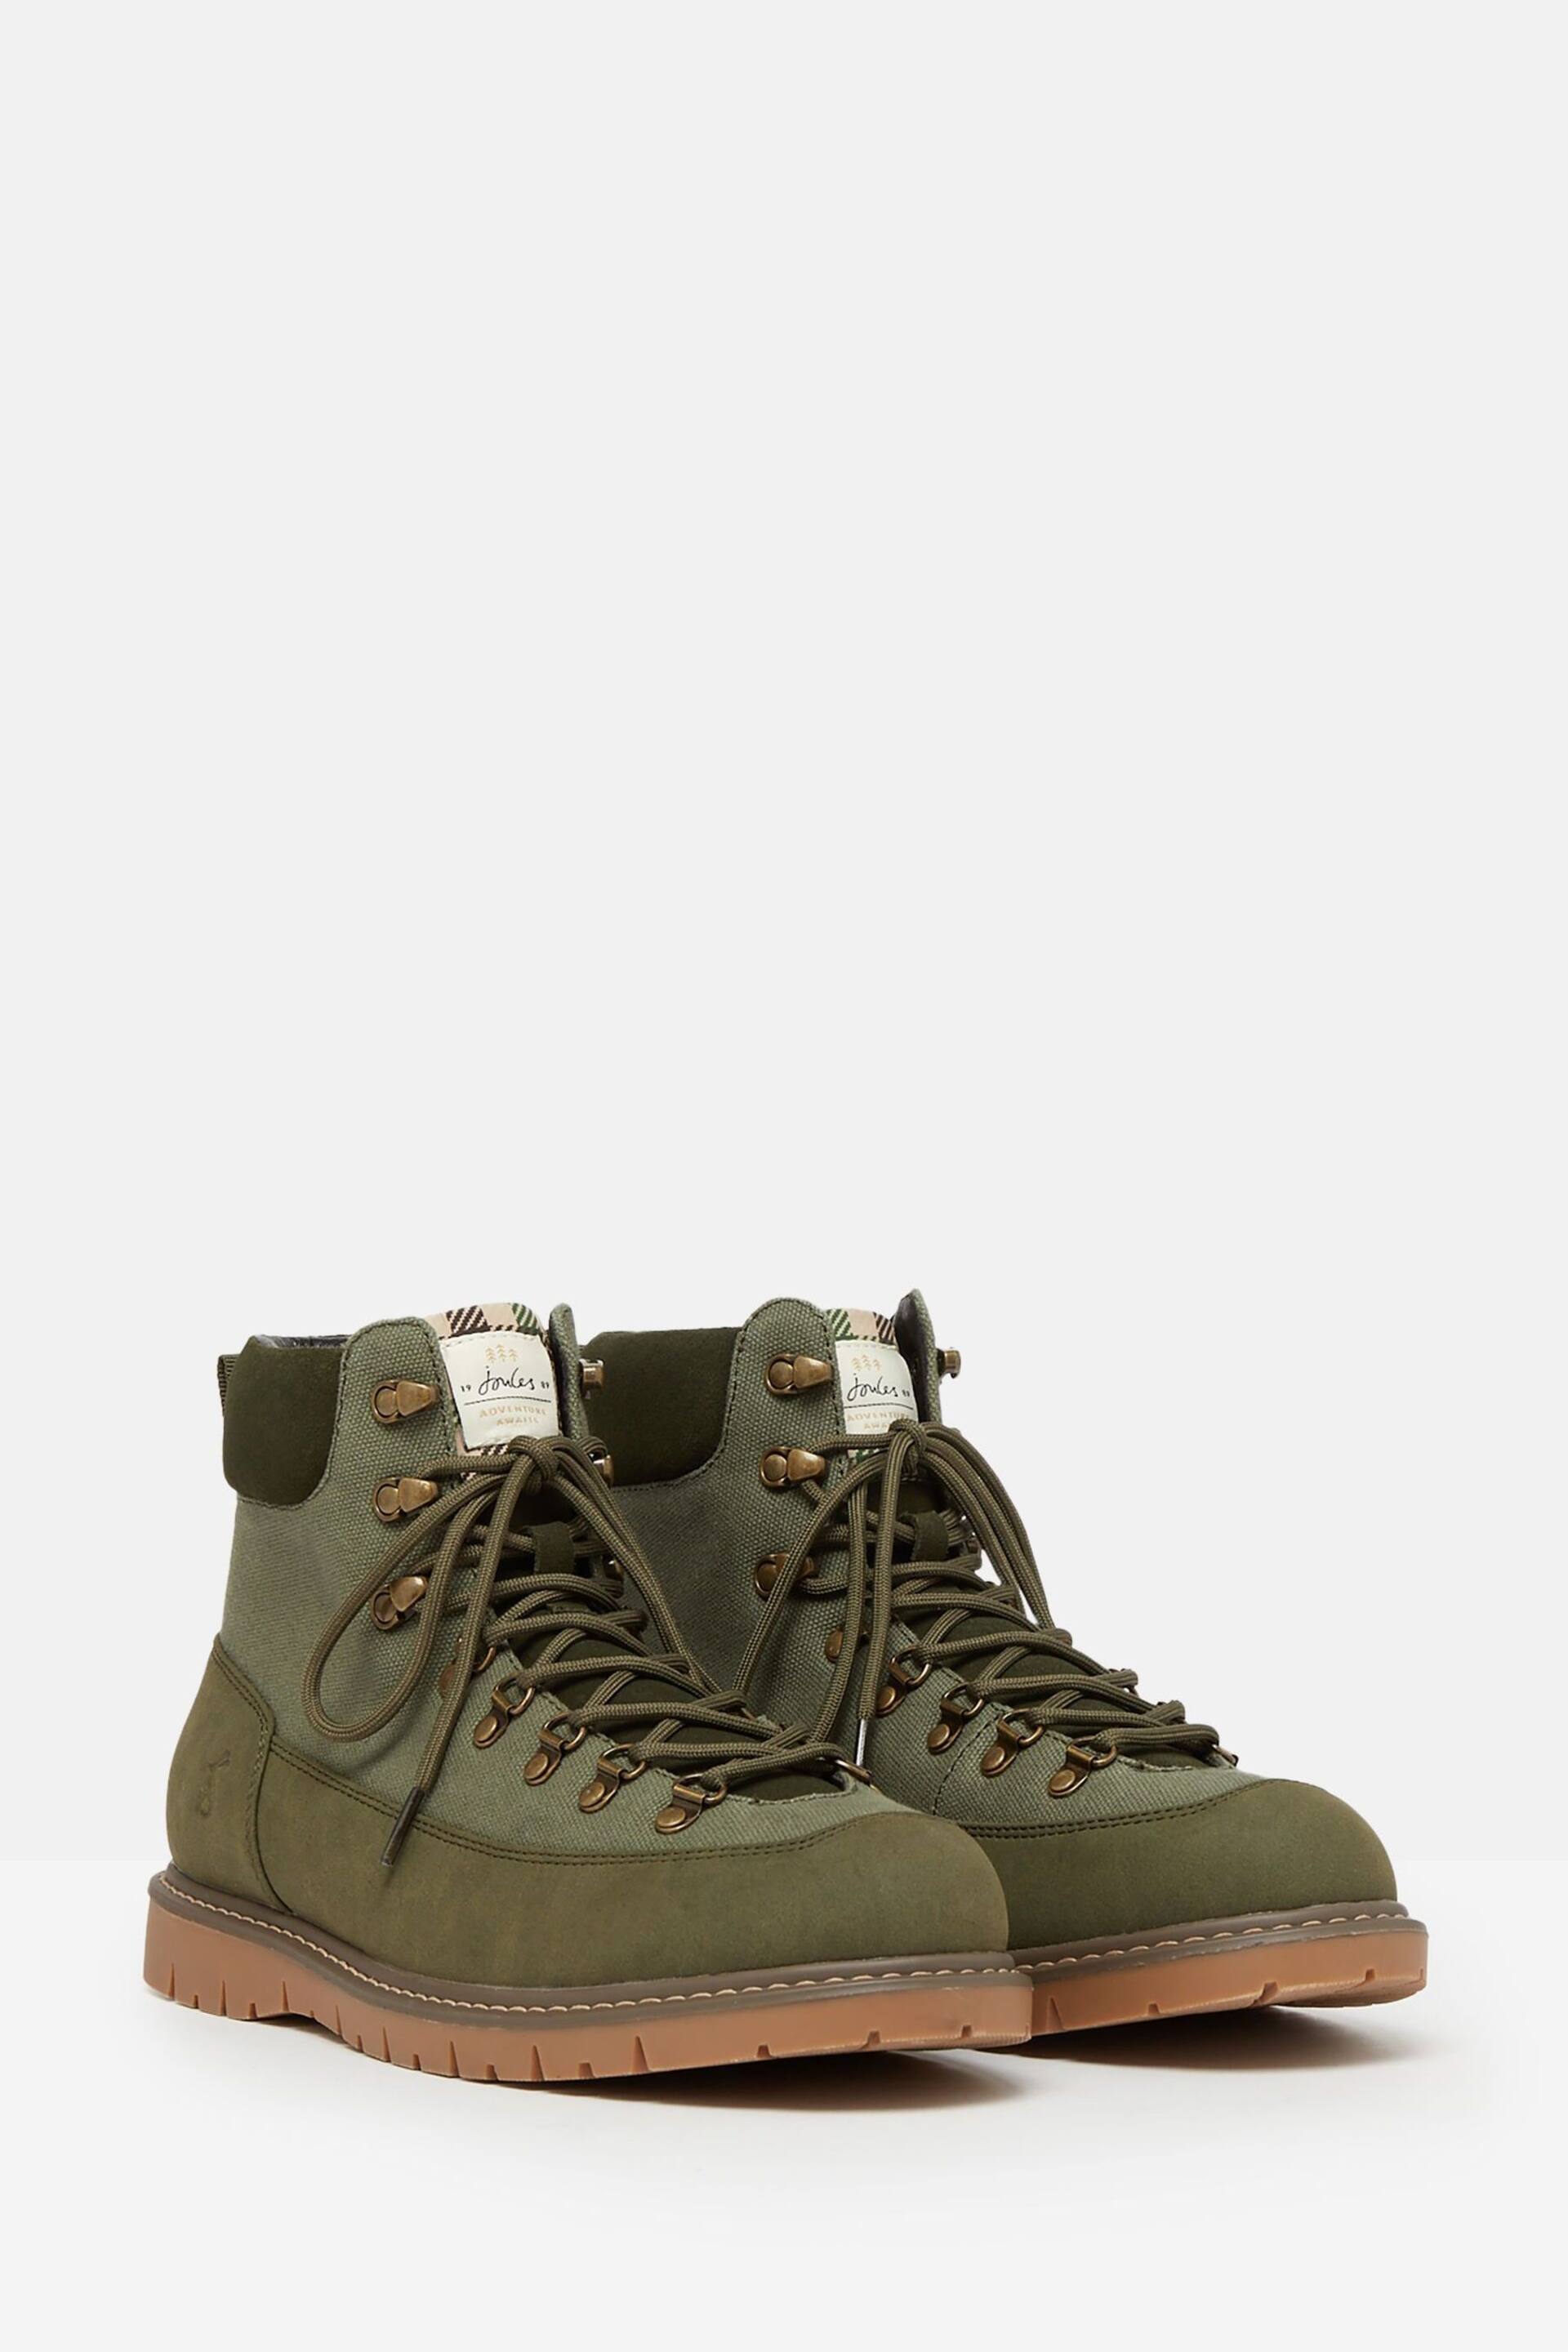 Joules Chester Khaki Green Lace Up Boots - Image 2 of 6